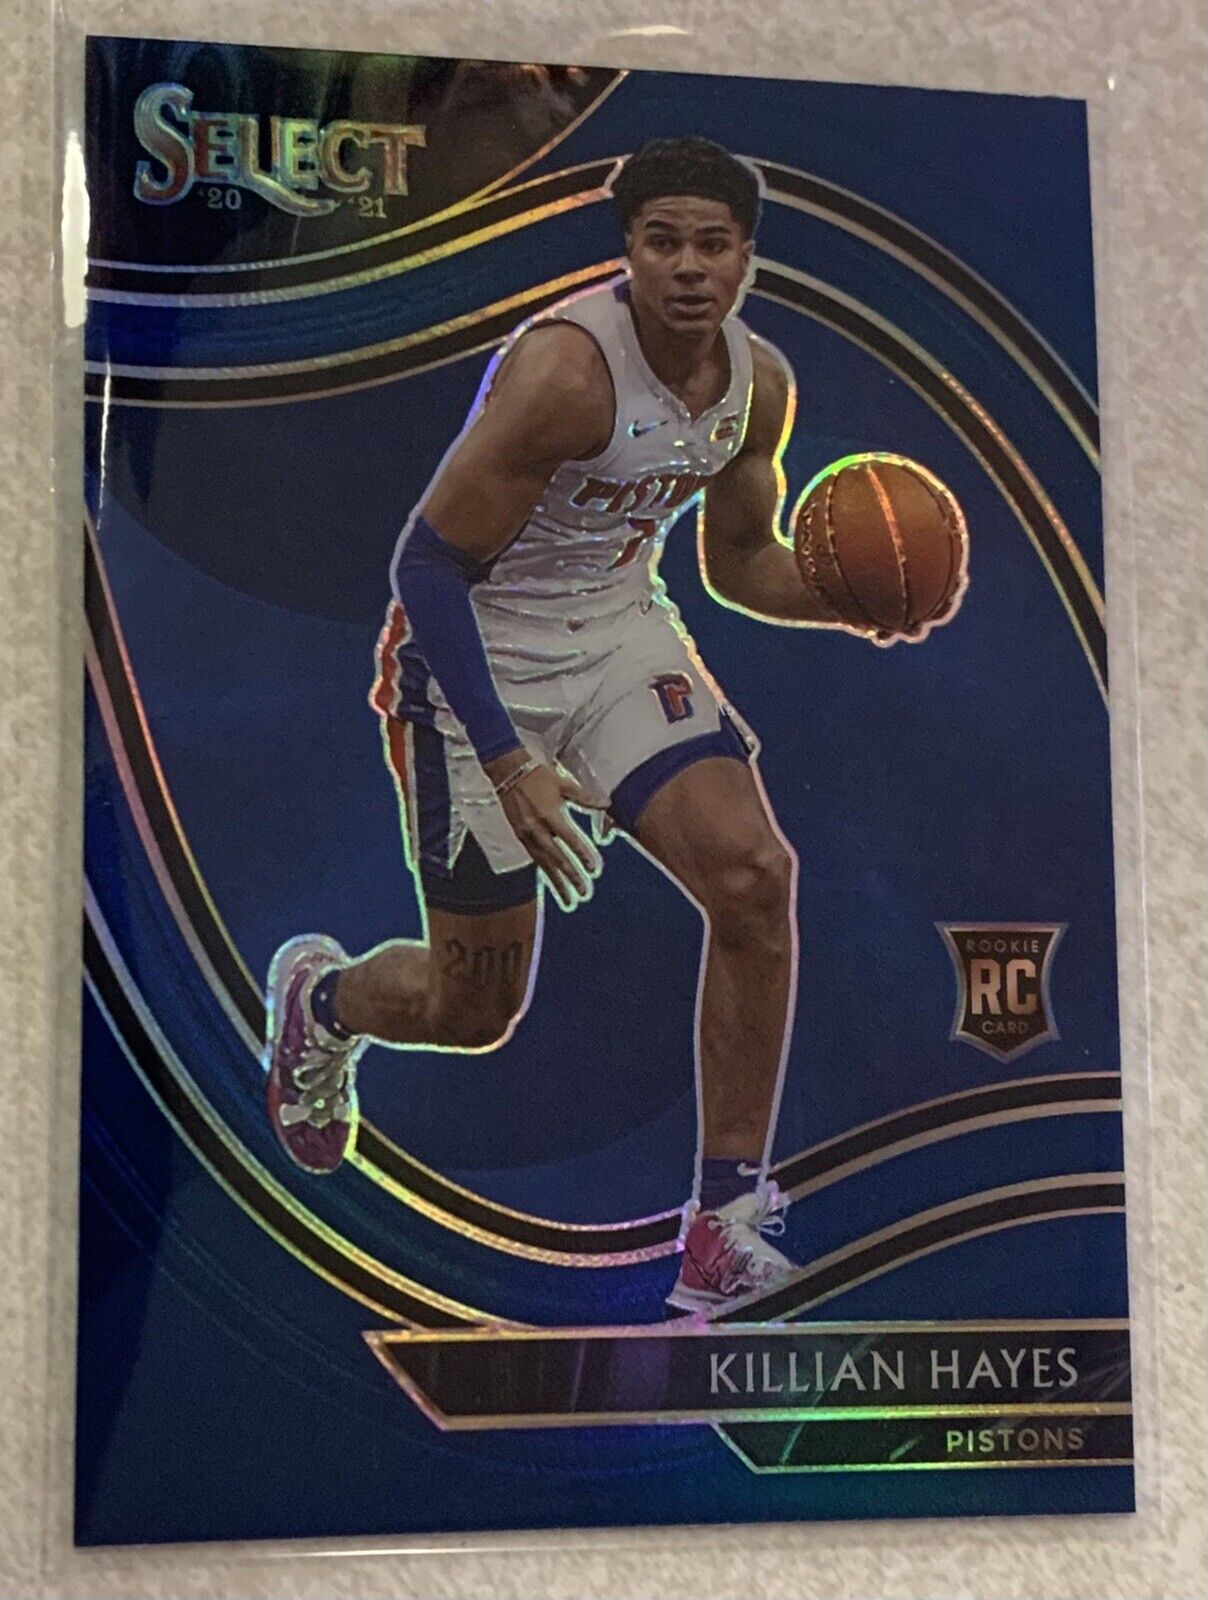 2020-21 Panini Select Killian Hayes Courtside Silver Rookie RC Blue Pistons